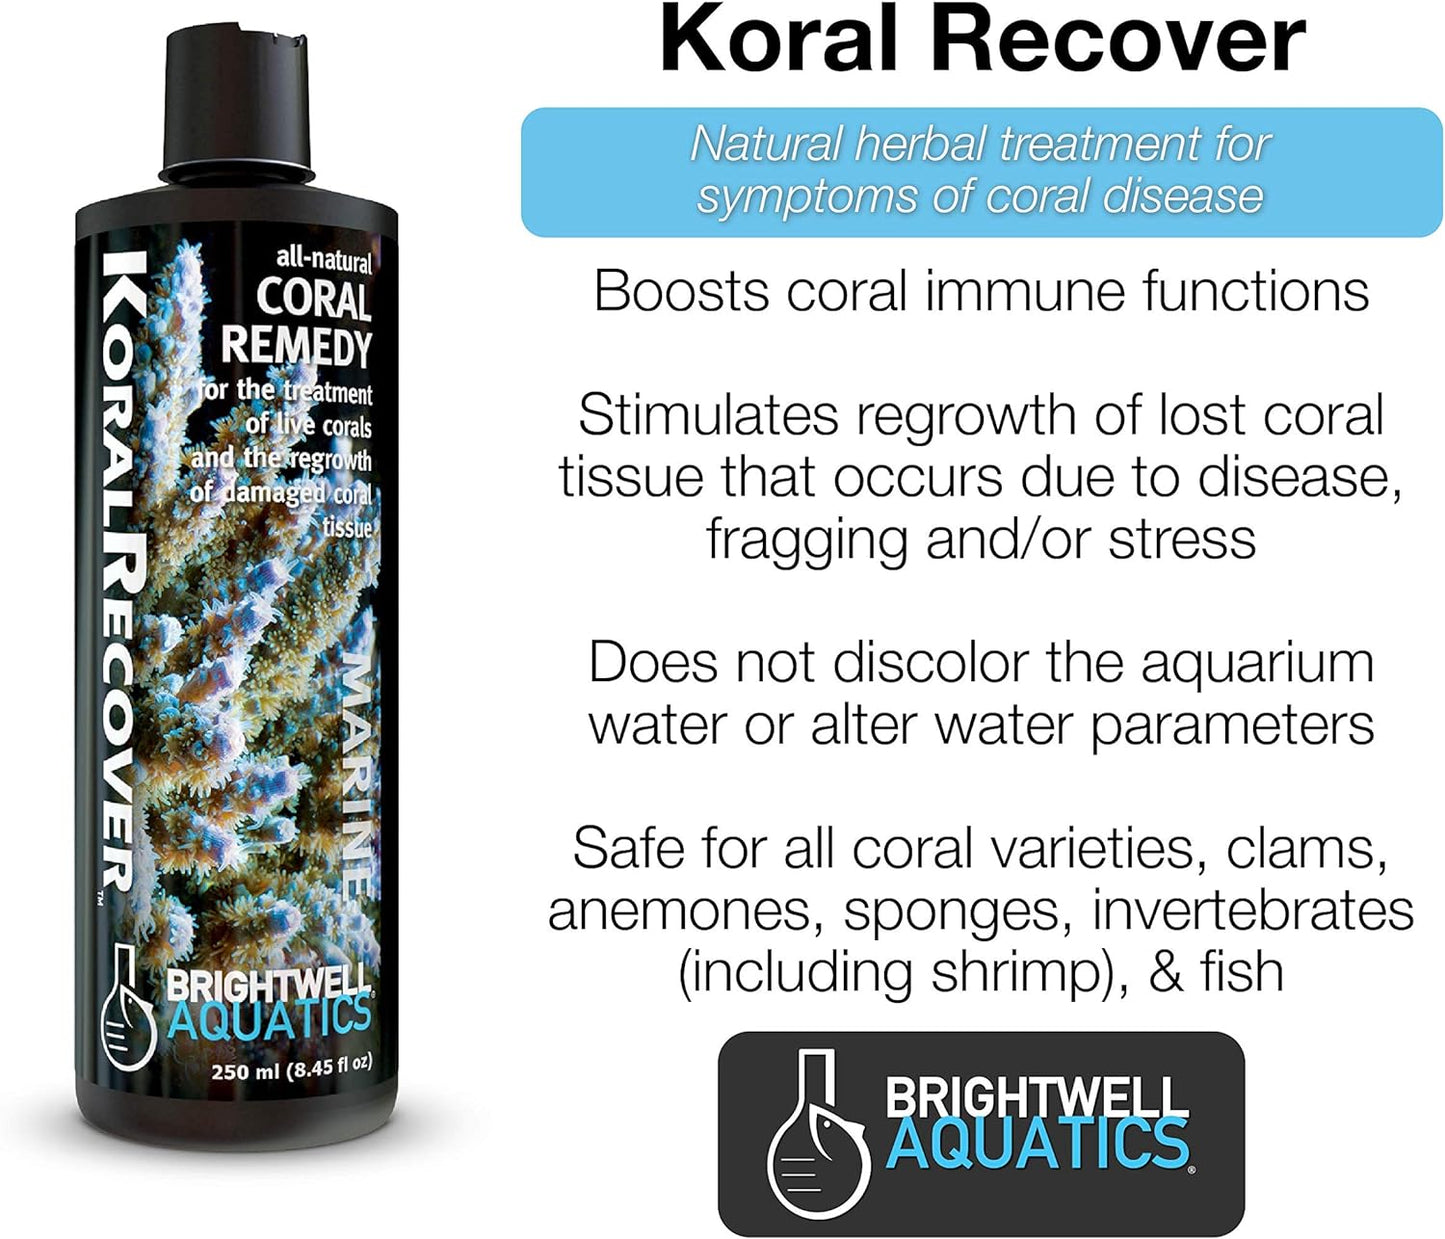 Koral Recover - Coral Remedy for Treatment of Live Corals & Regrowth of Damaged Coral Tissue, 500Ml, 500-ML (KRC500)